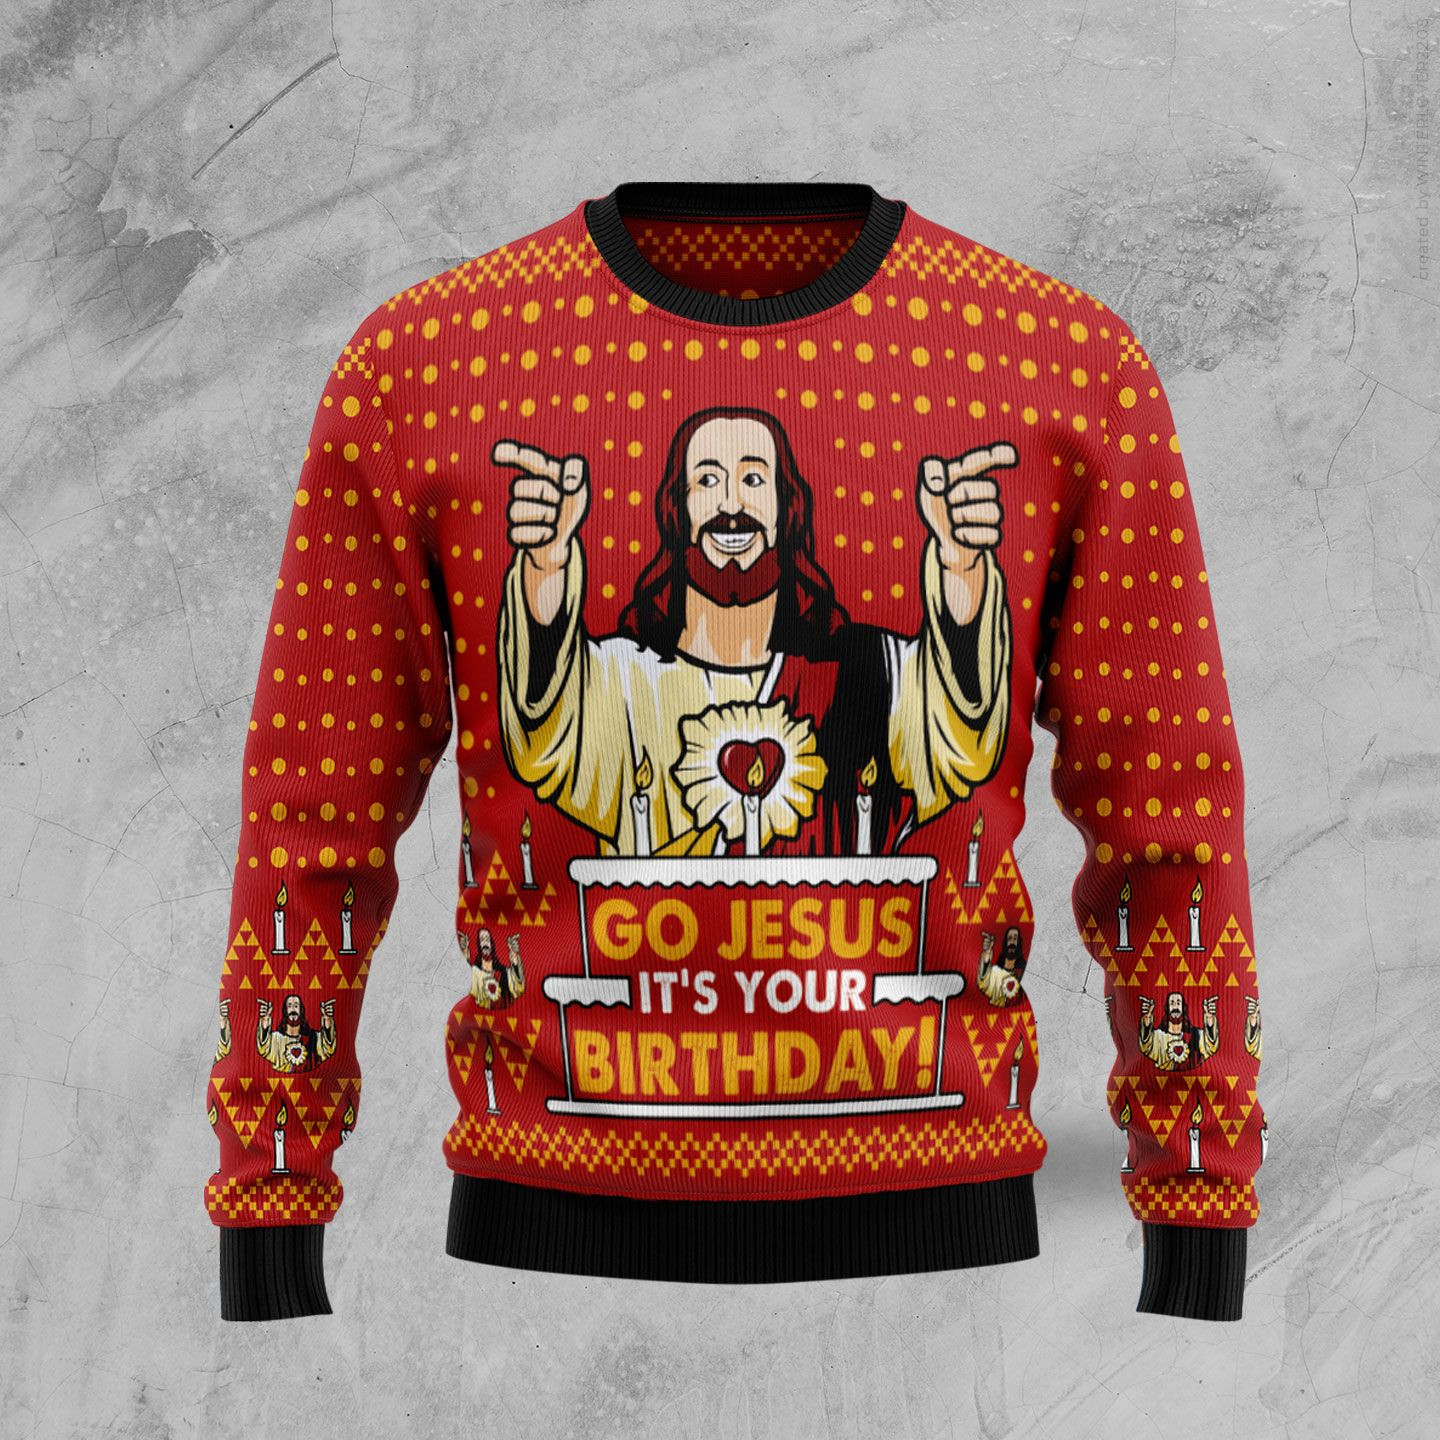 Jessuss Birthday Ugly Christmas Sweater